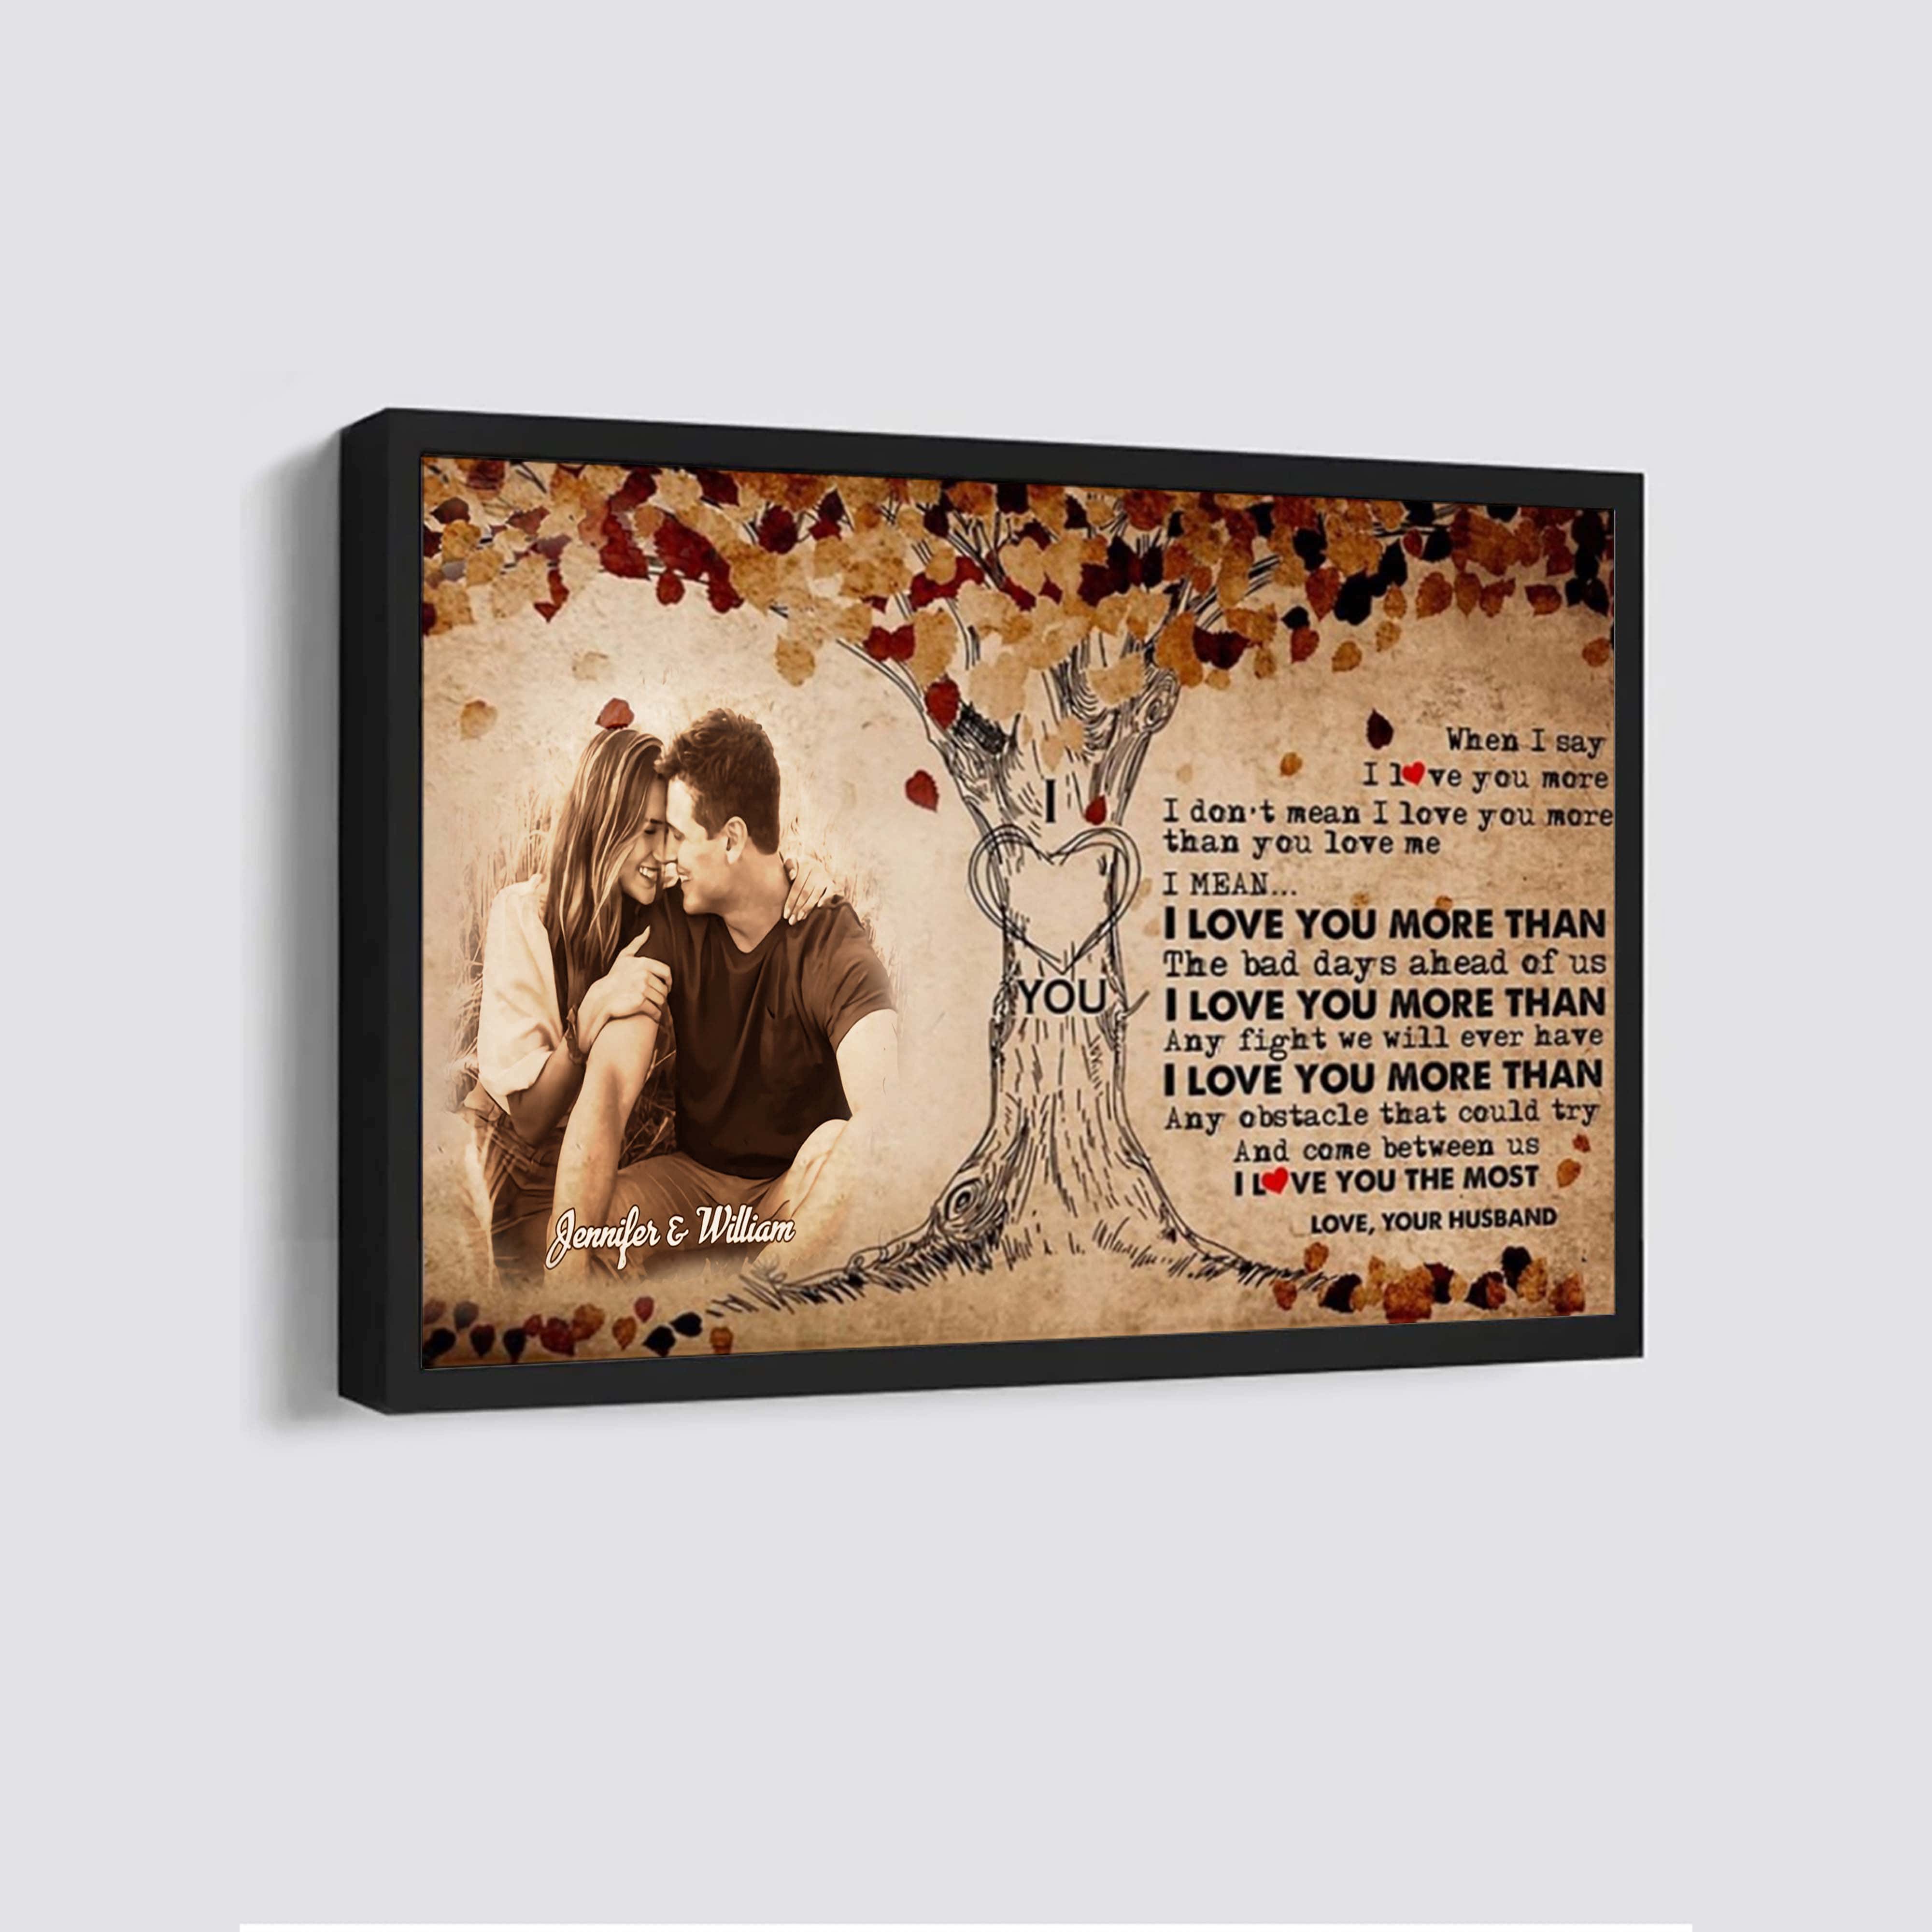 Valentines gifts-Poster canvas-Custom Image- Husband to Wife- If I could give you one thing in life